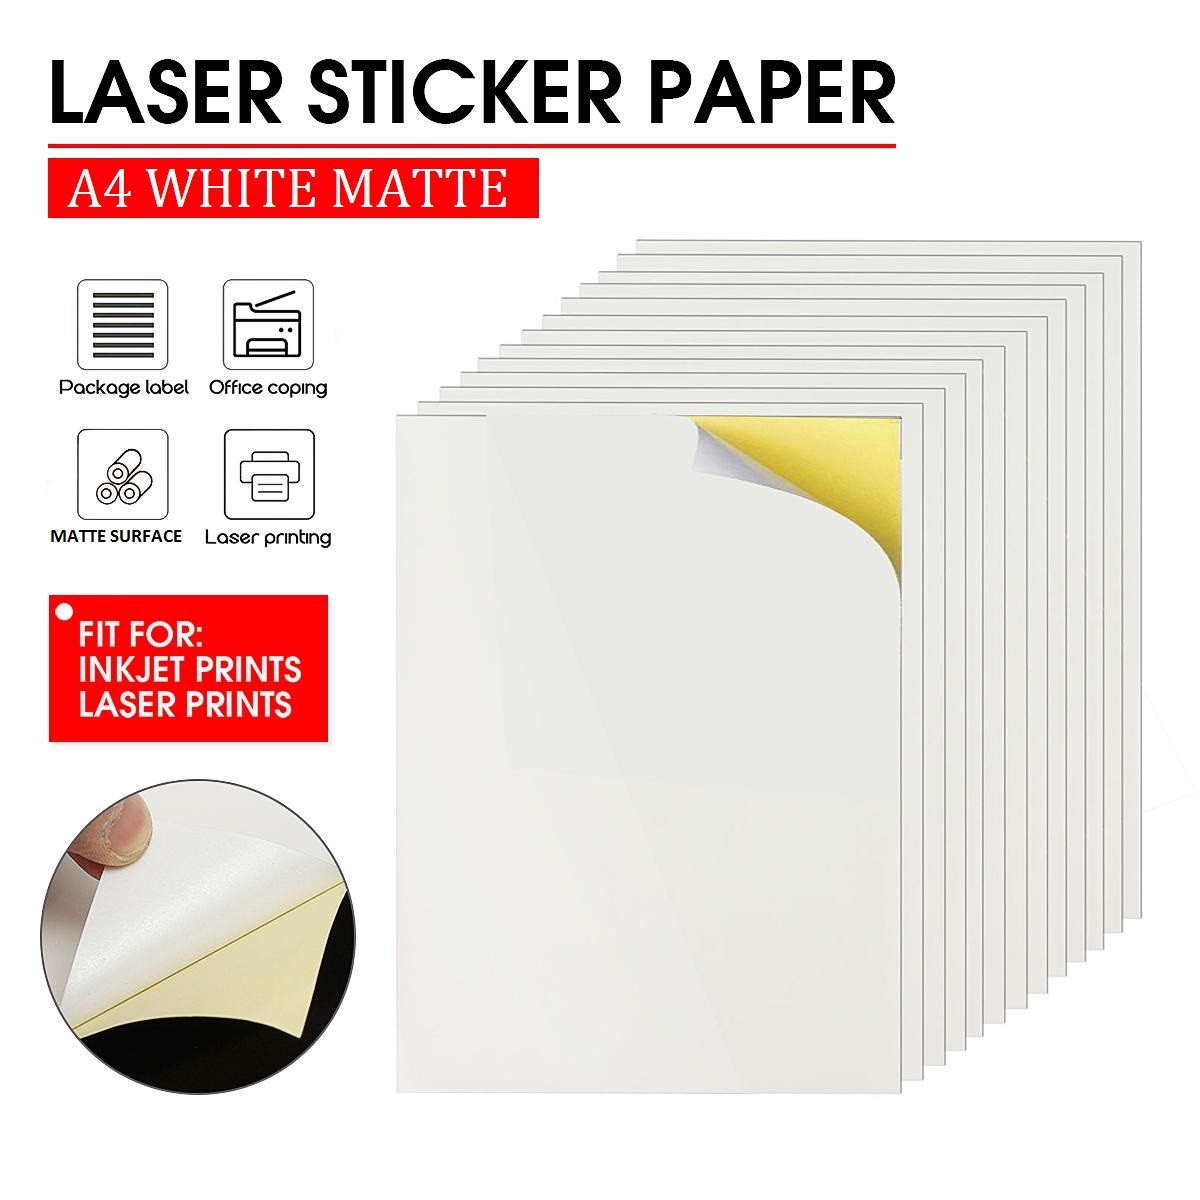 Sticker Sheets For Shipping Labels and Printing – Pack of 25